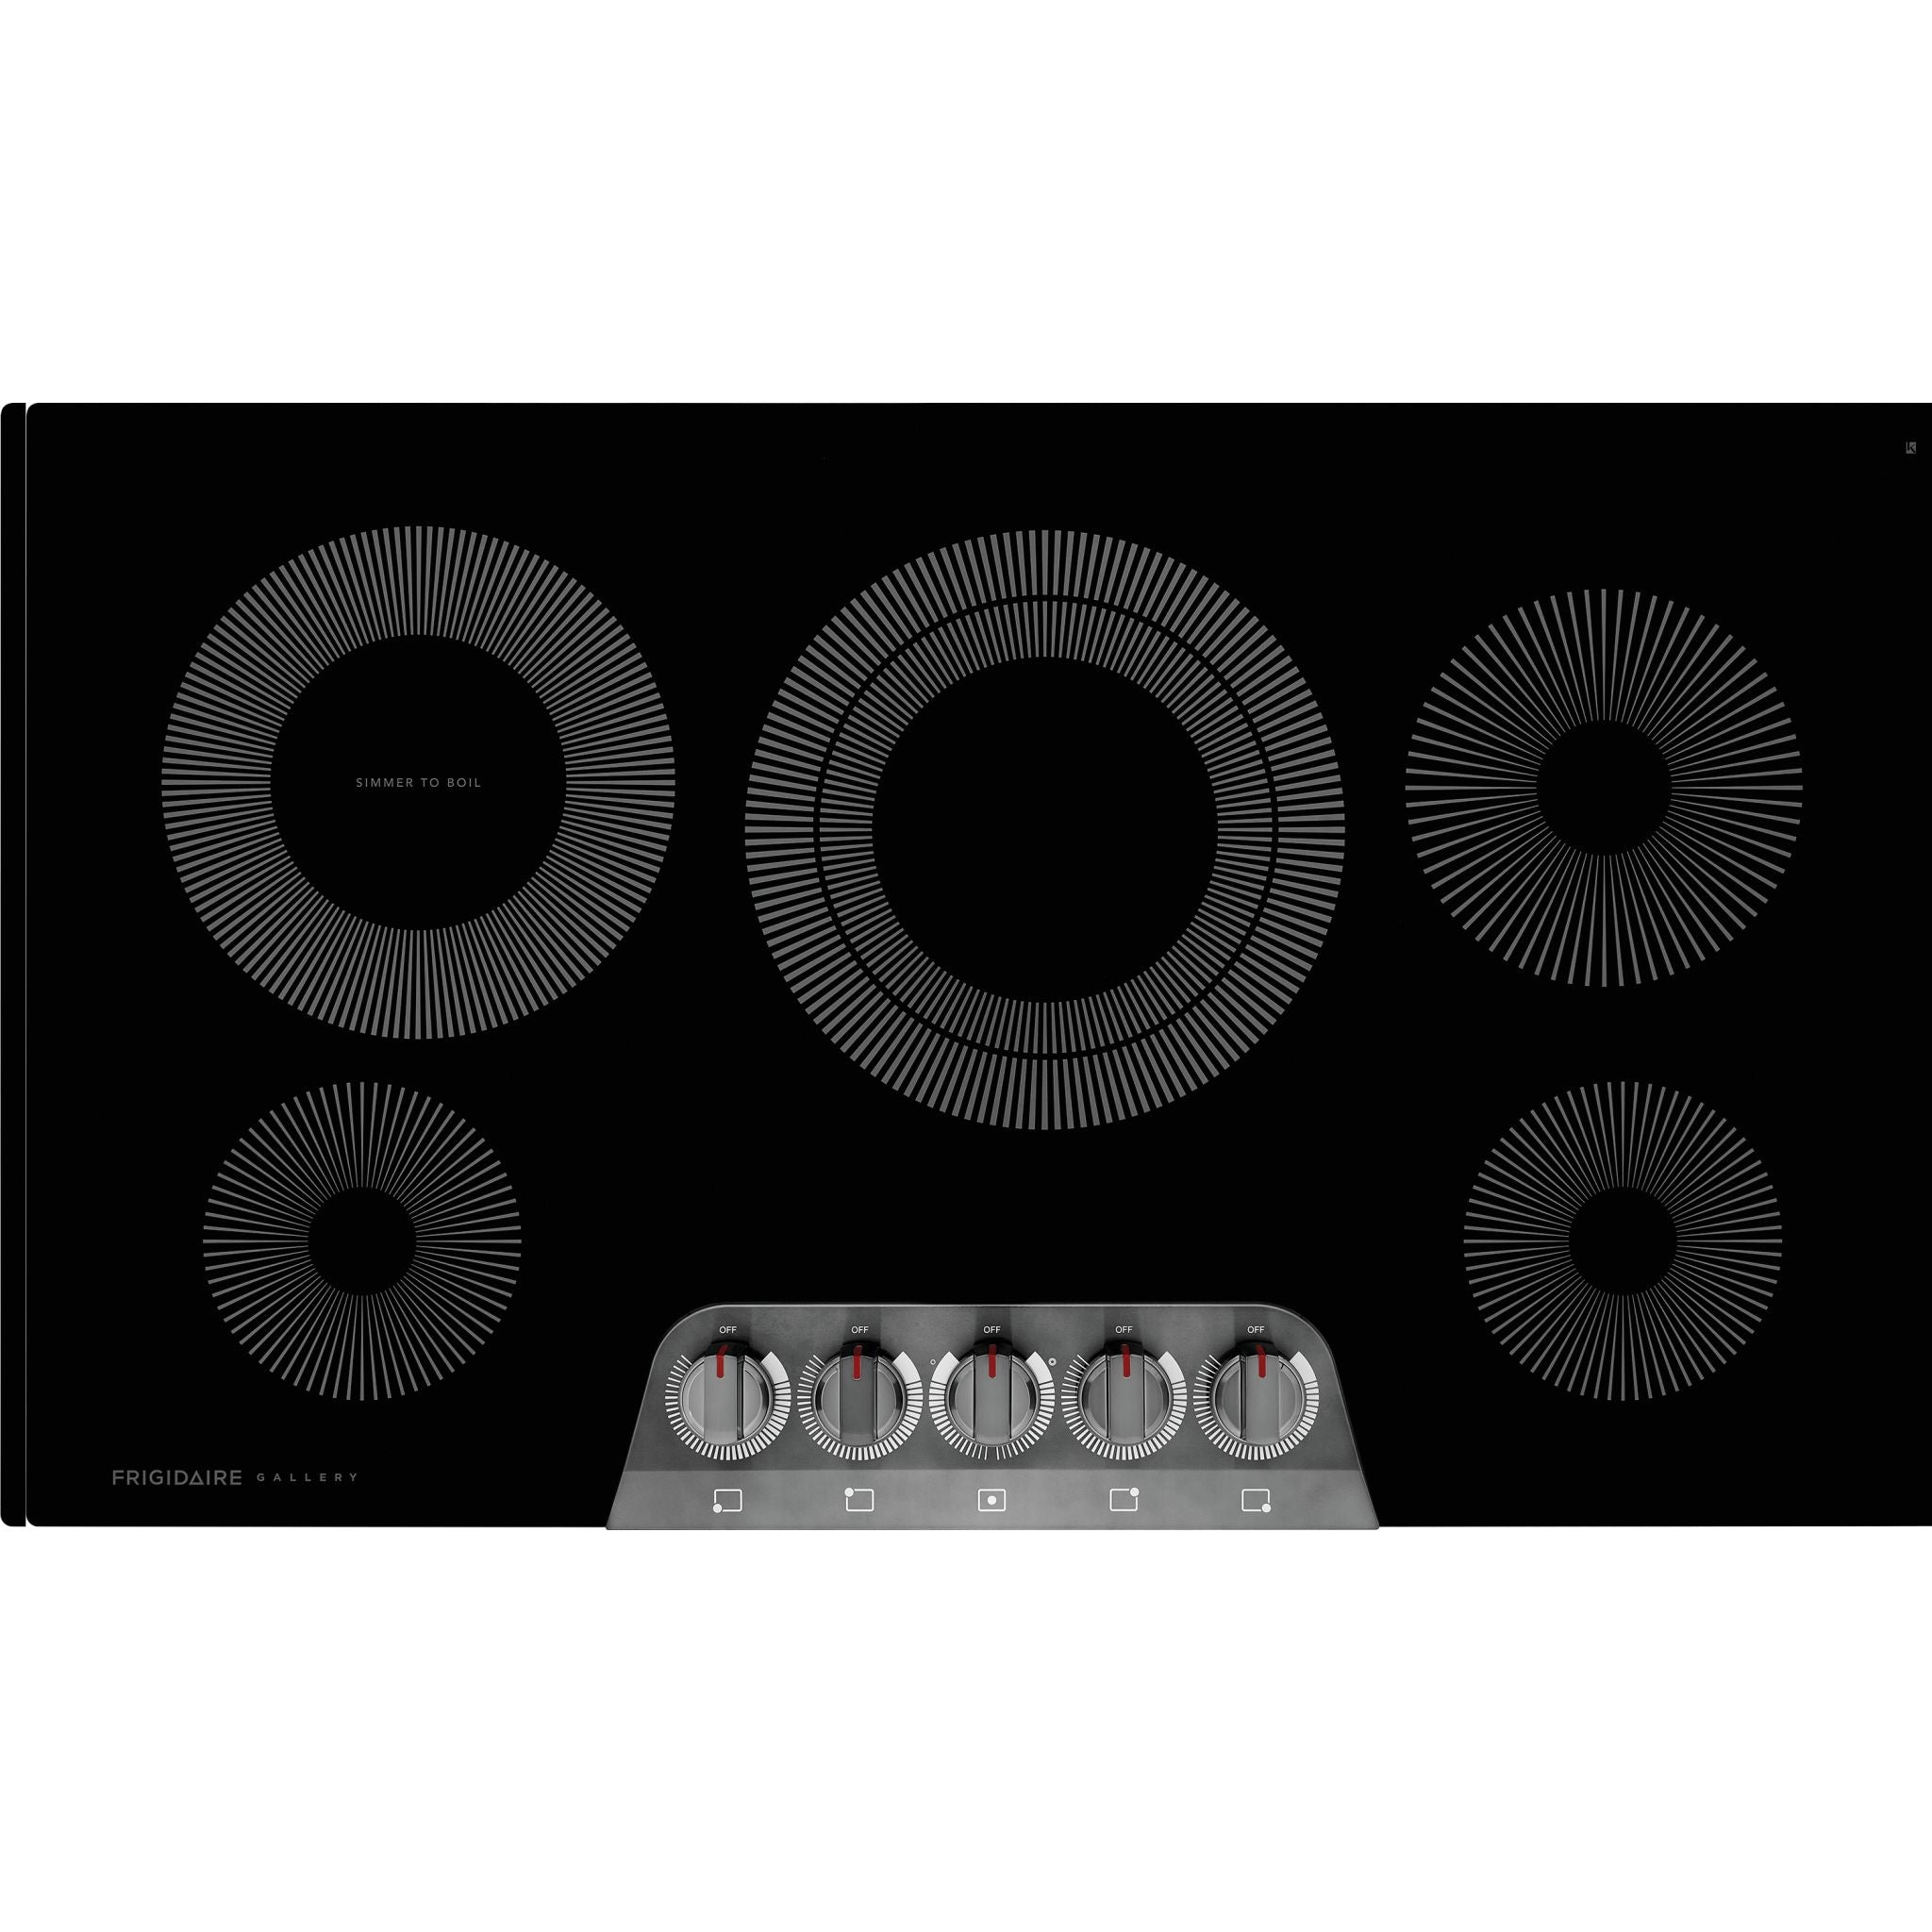 Frigidaire Gallery, Frigidaire Gallery 36" Cooktop (GCCE3670AD) - Black Stainless